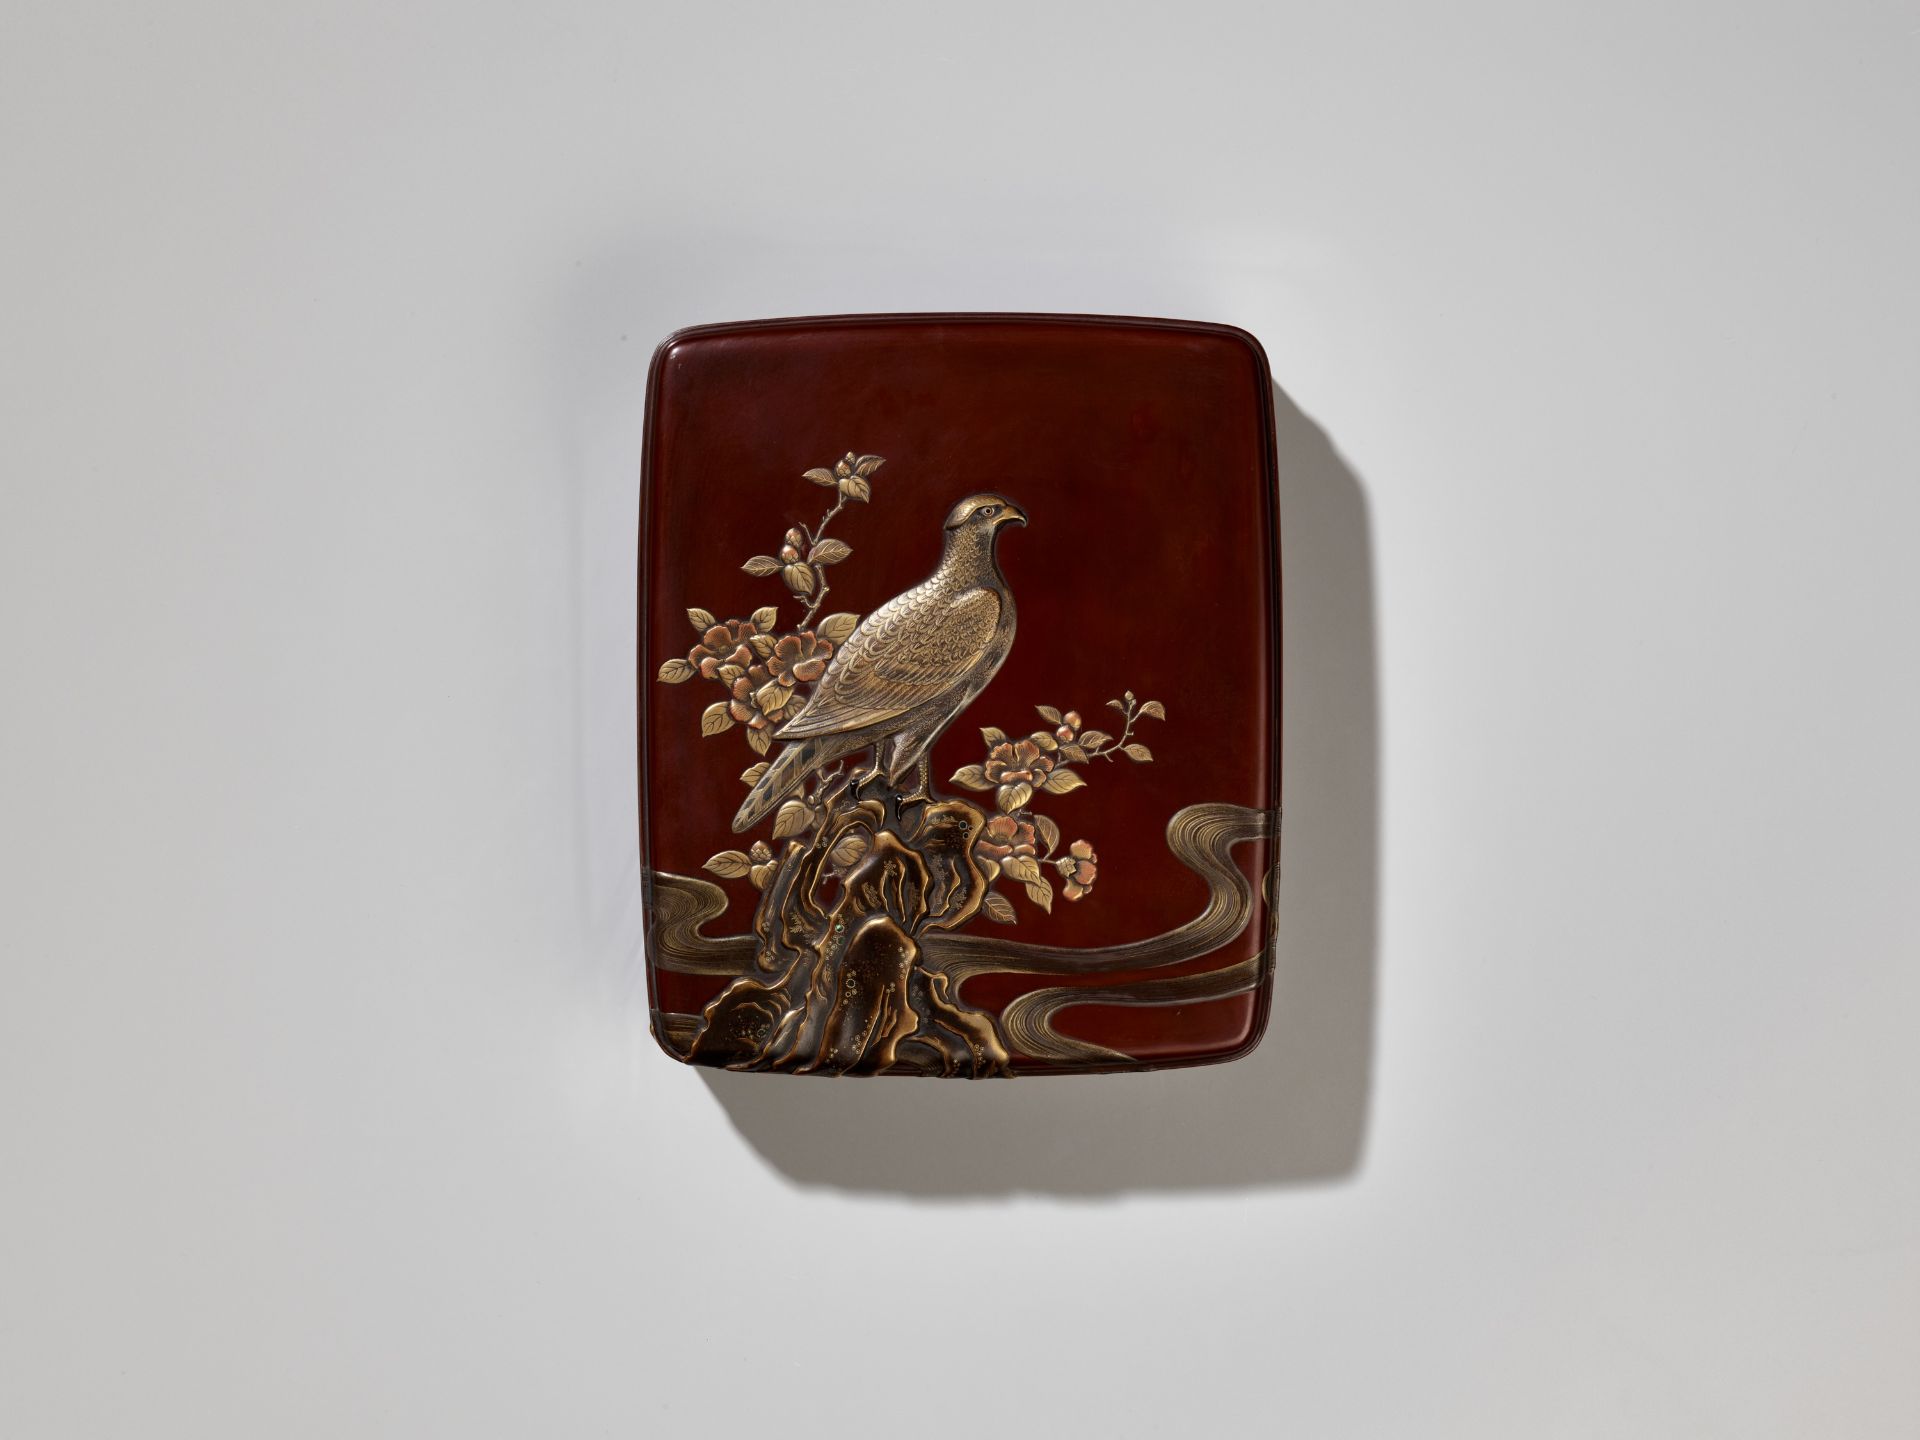 SHOGAKU: A SUPERB LACQUER SUZURIBAKO DEPICTING AN AUTUMNAL SCENE WITH FALCON AND SPARROWS - Image 9 of 14